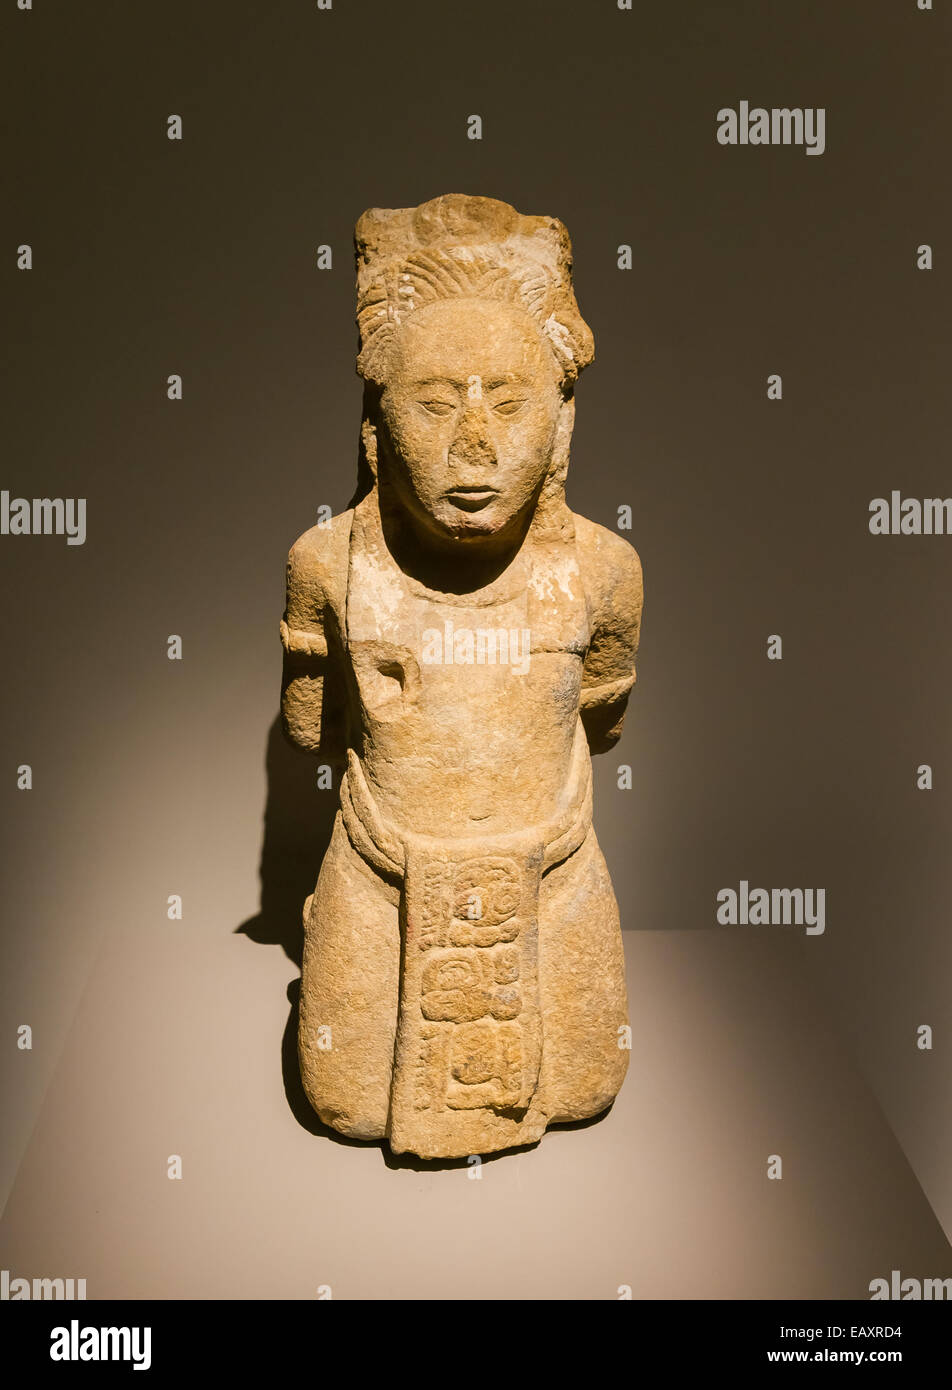 Monument n°151 of Toniná, Chiapas, Mexico, depicting a bound prisoner. Limestone, classical-recent era (600 - 900 C.E.) The glyphs mean that the man is a aj k'uhu'n, a high ranked religious and political man. Stock Photo